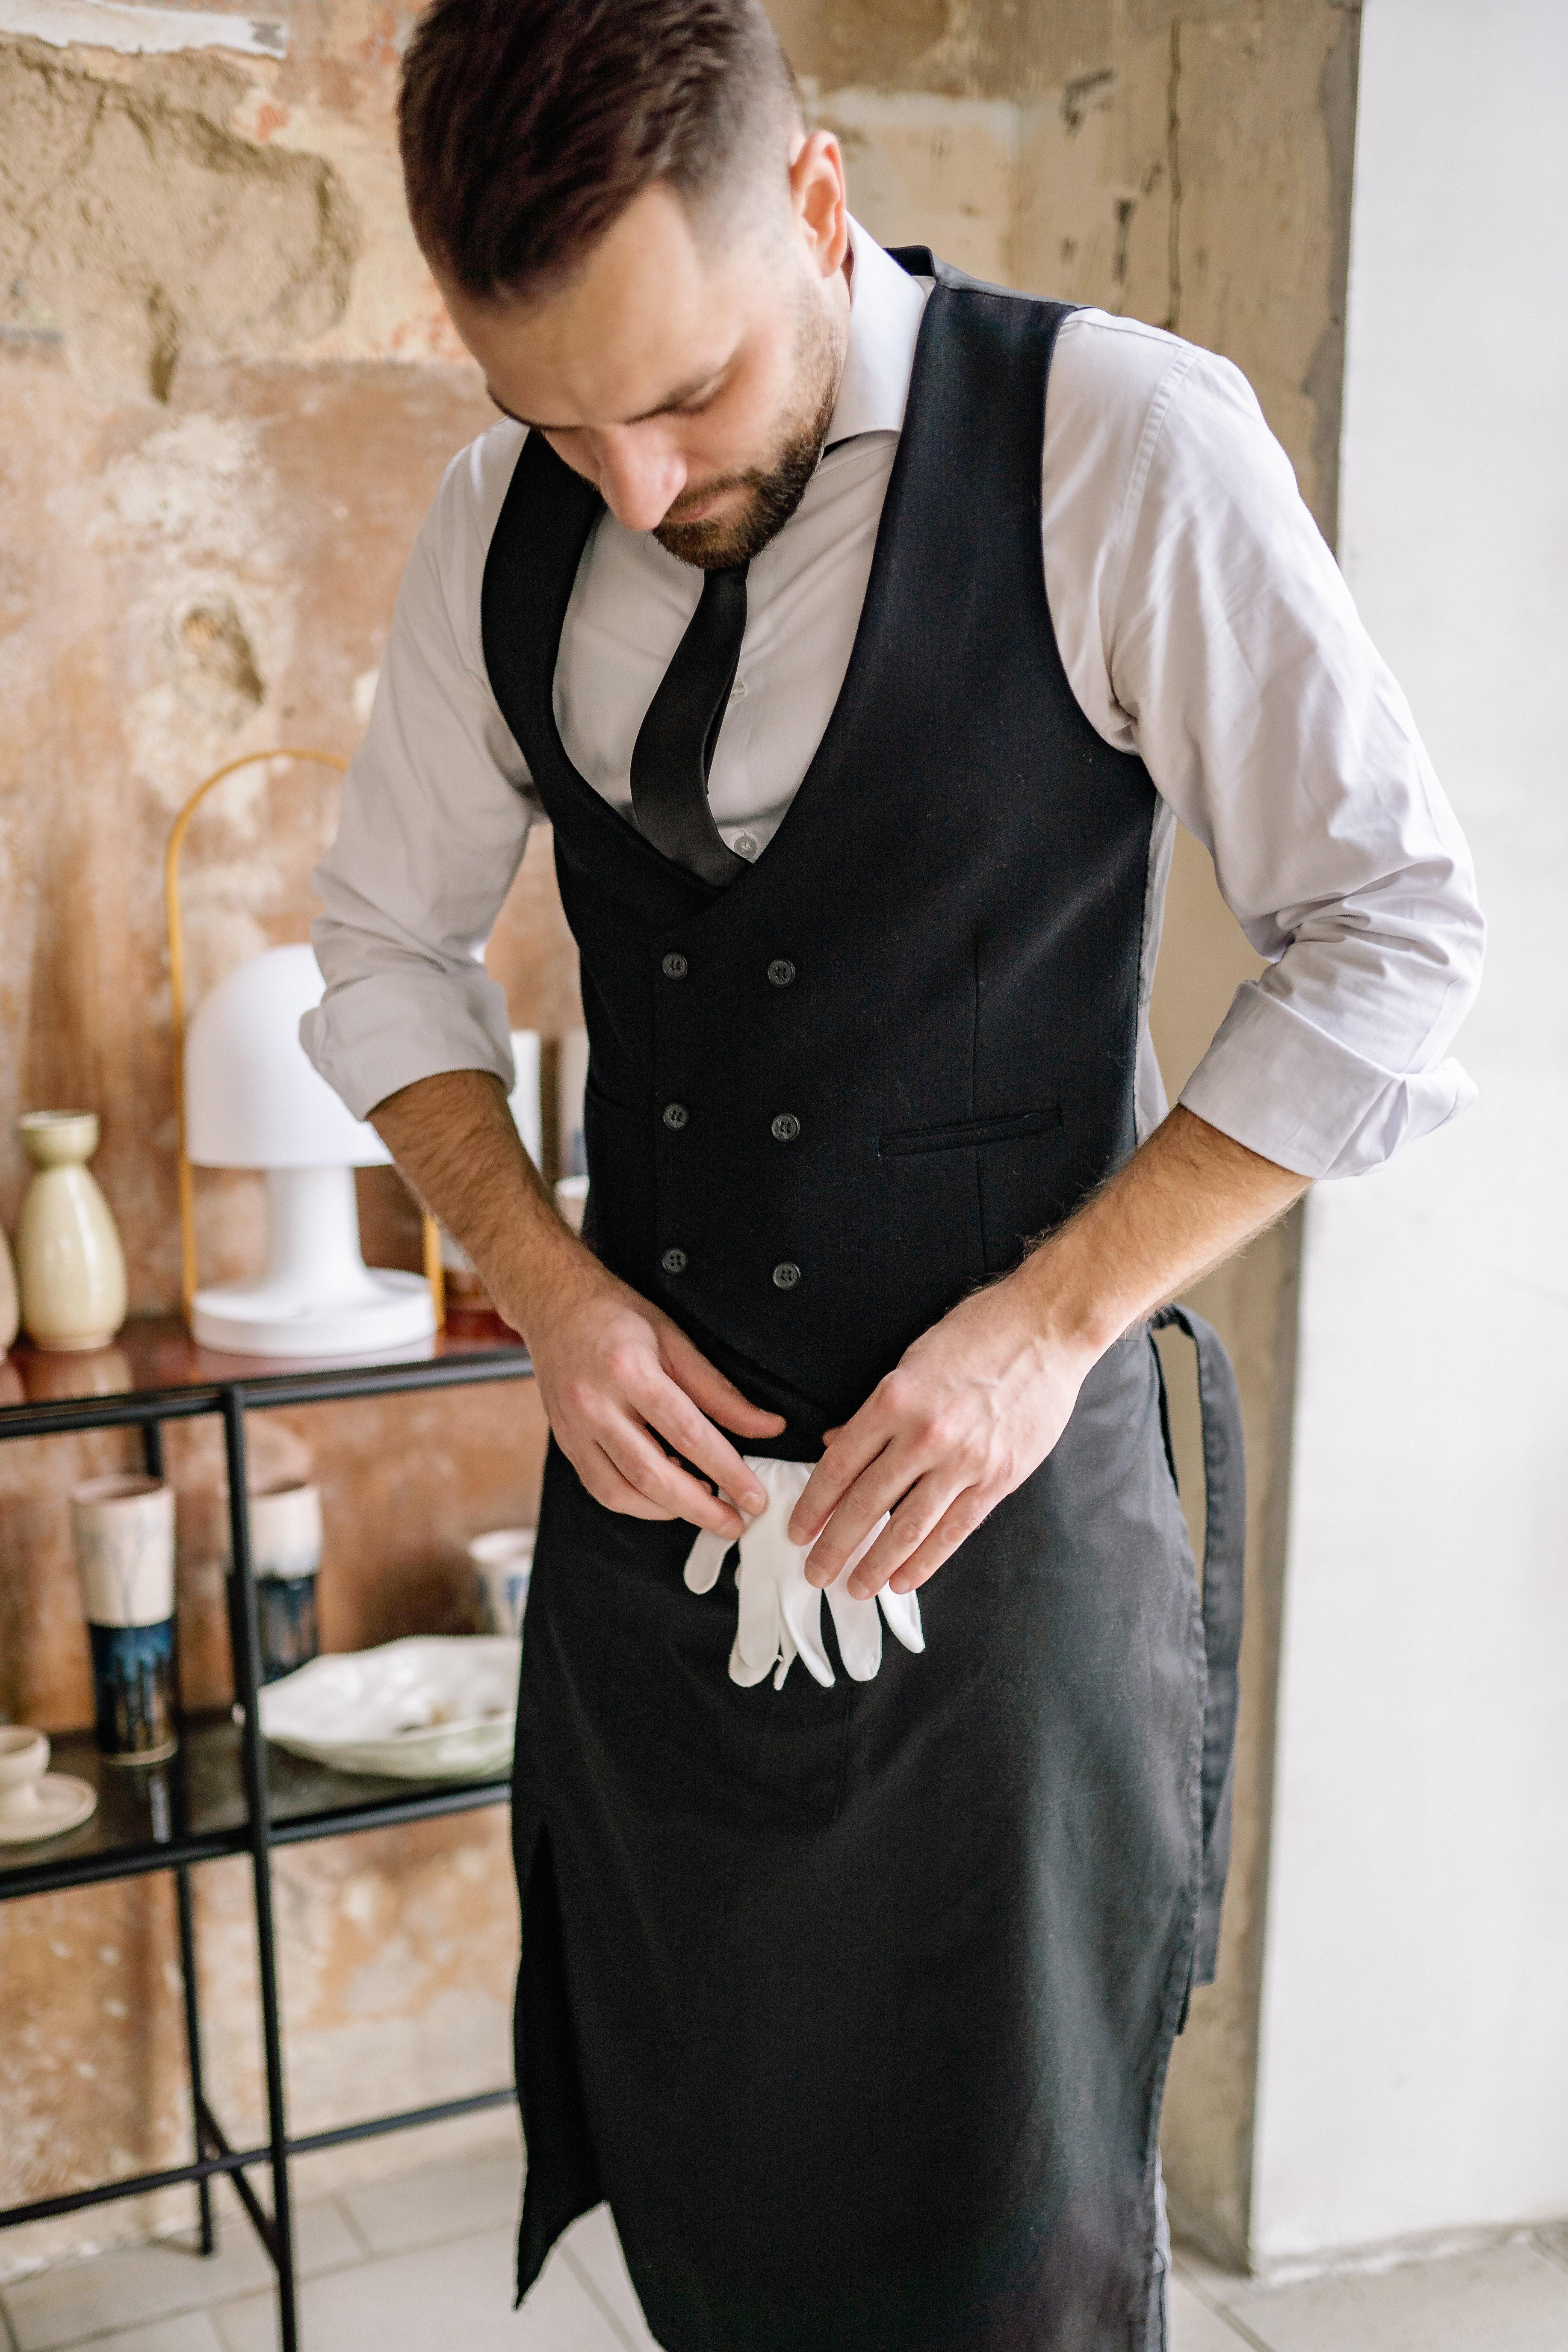 How To Tie An Apron Behind Your Back 